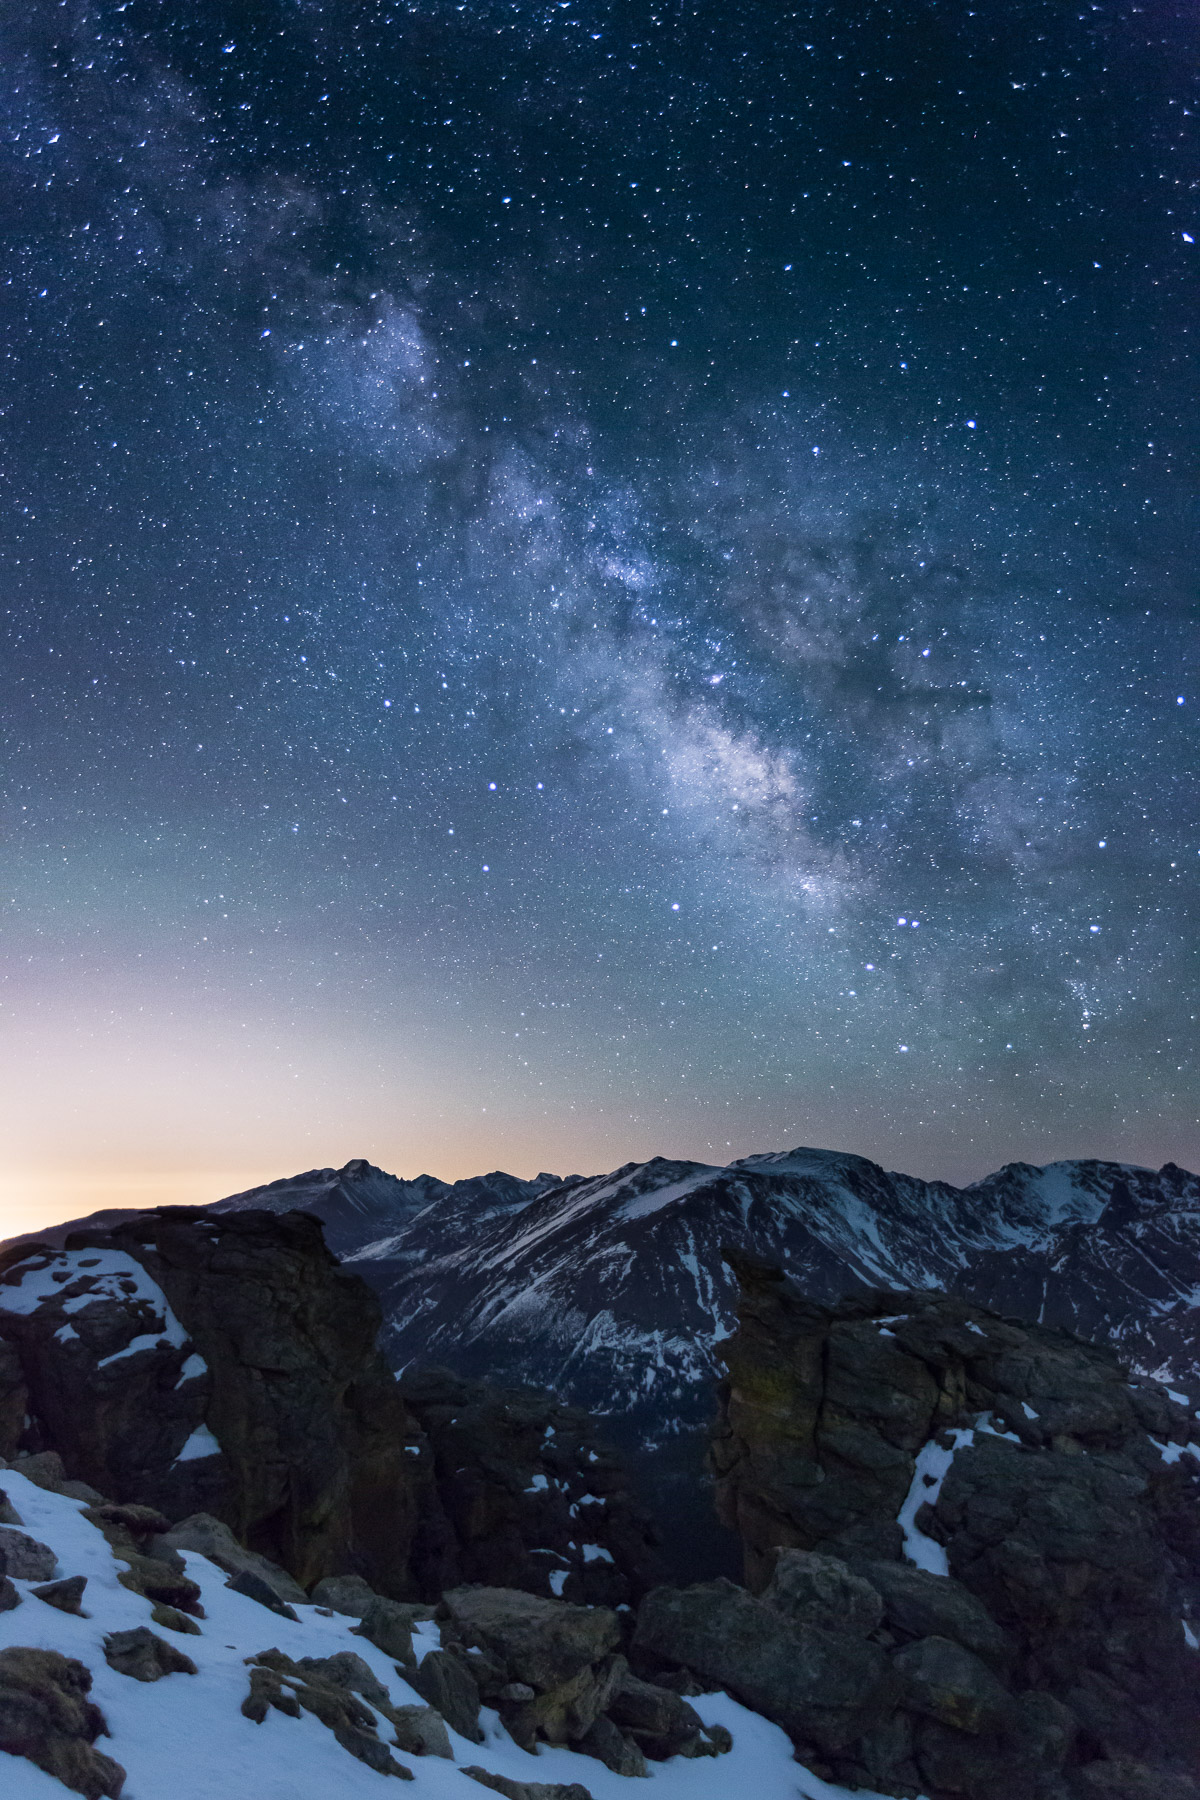 Shooting the Stars in Rocky Mountain National Park